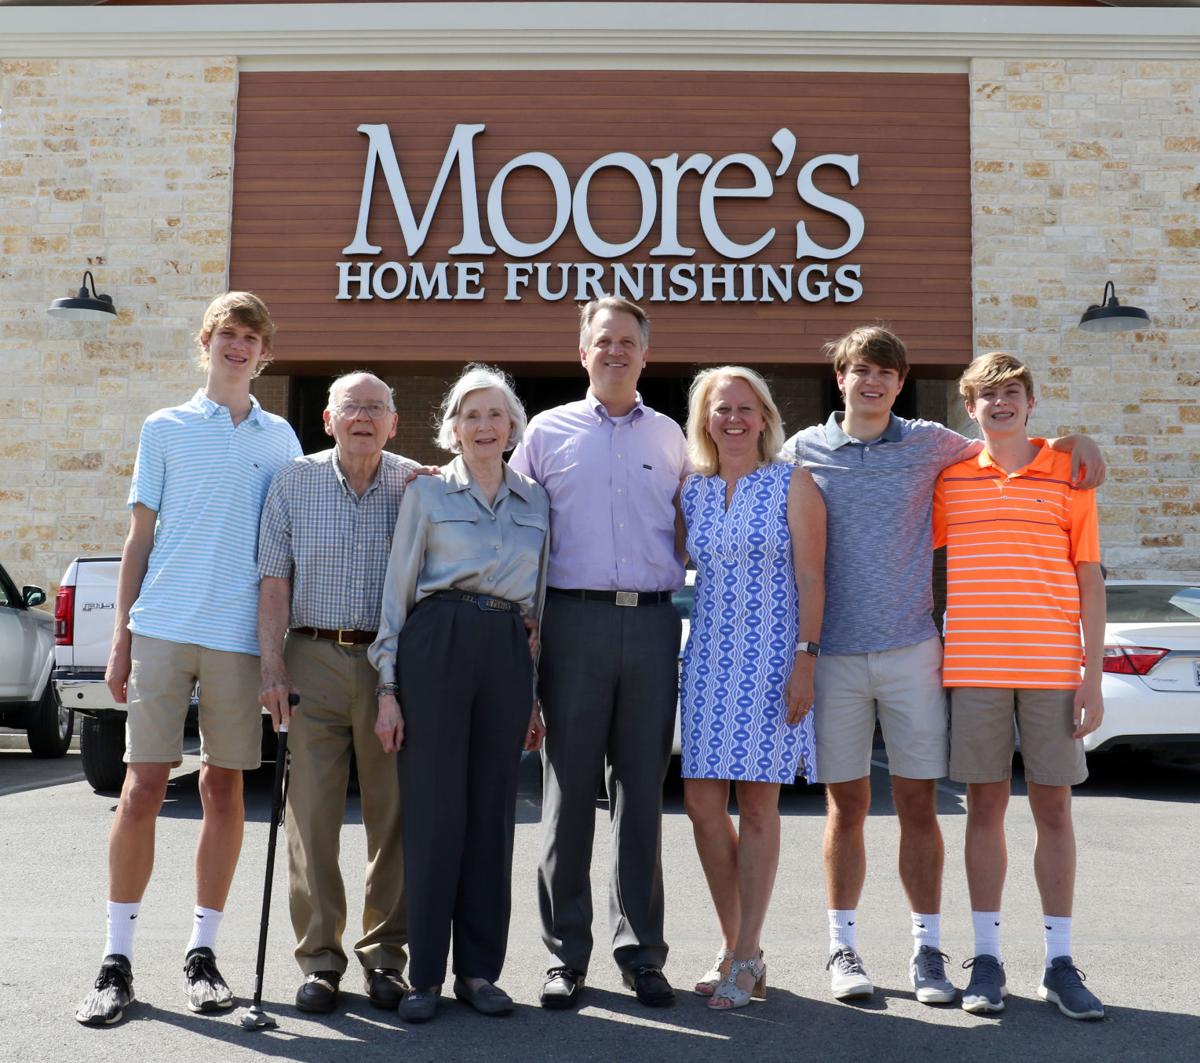 Moore's Home Furnishings - Kerrville, Texas Furniture Store